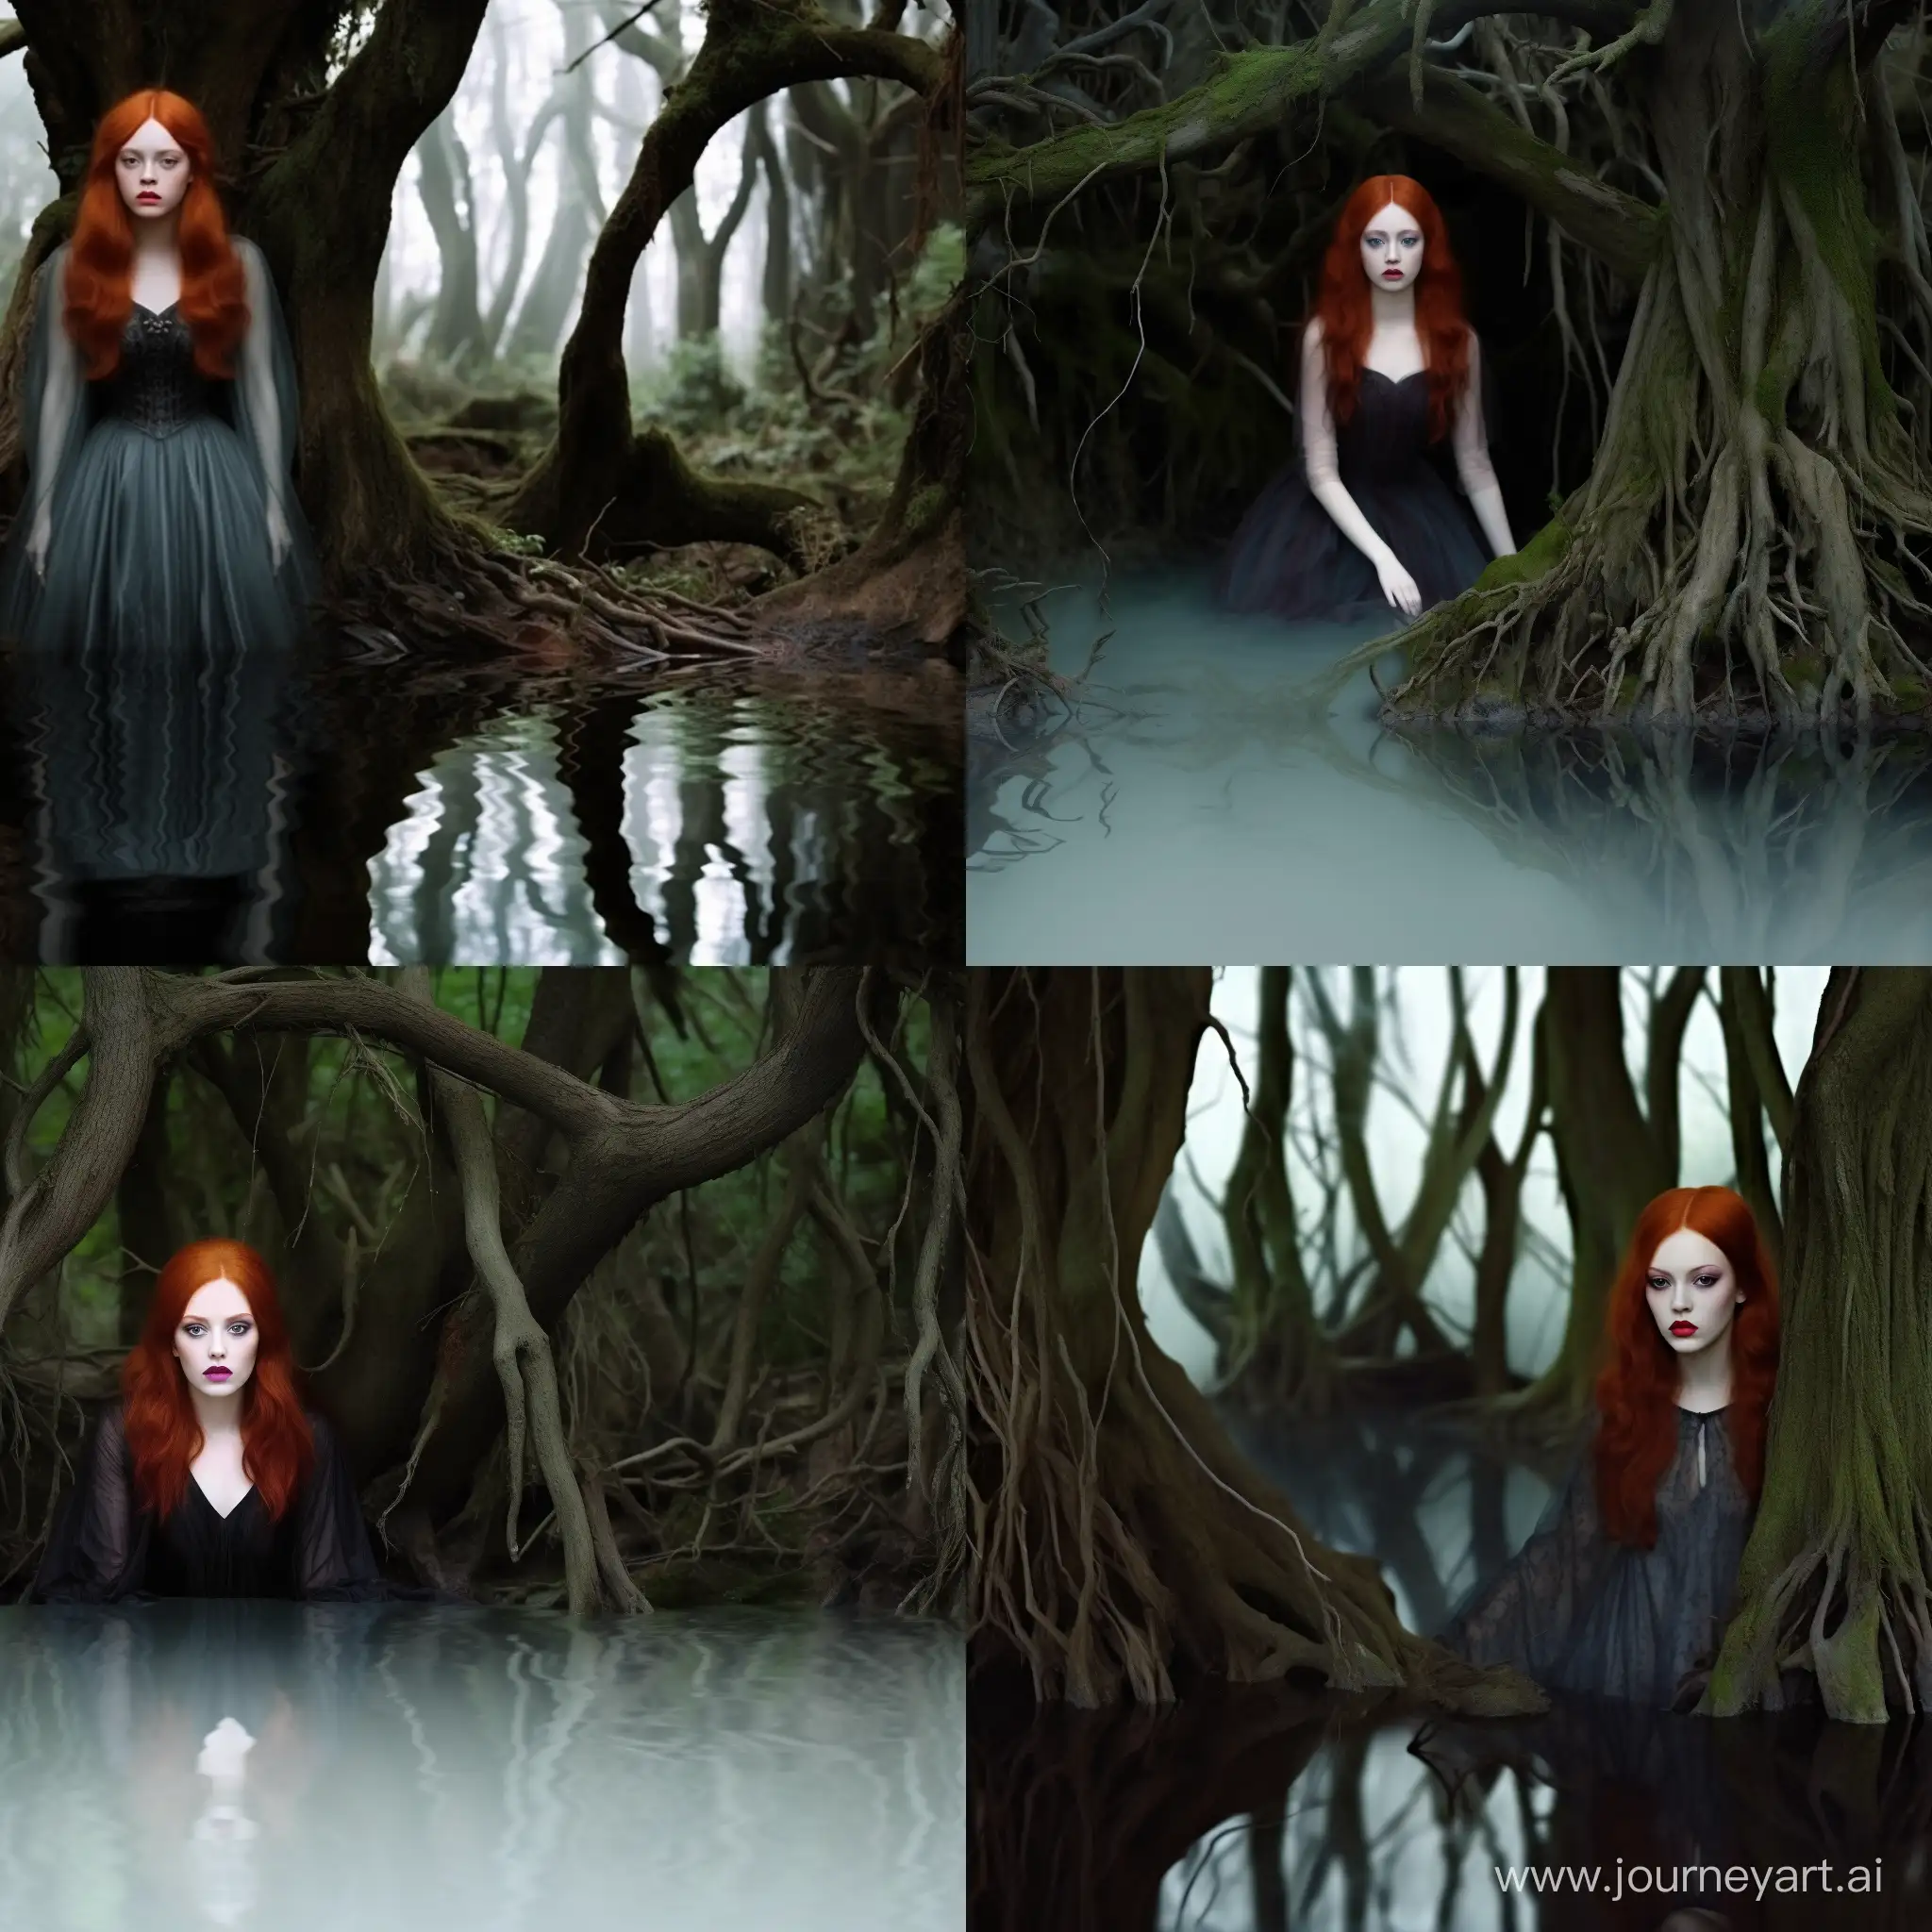 RedHaired-Woman-Surrendered-to-Tranquil-Sleep-in-Spring-Water-Lake